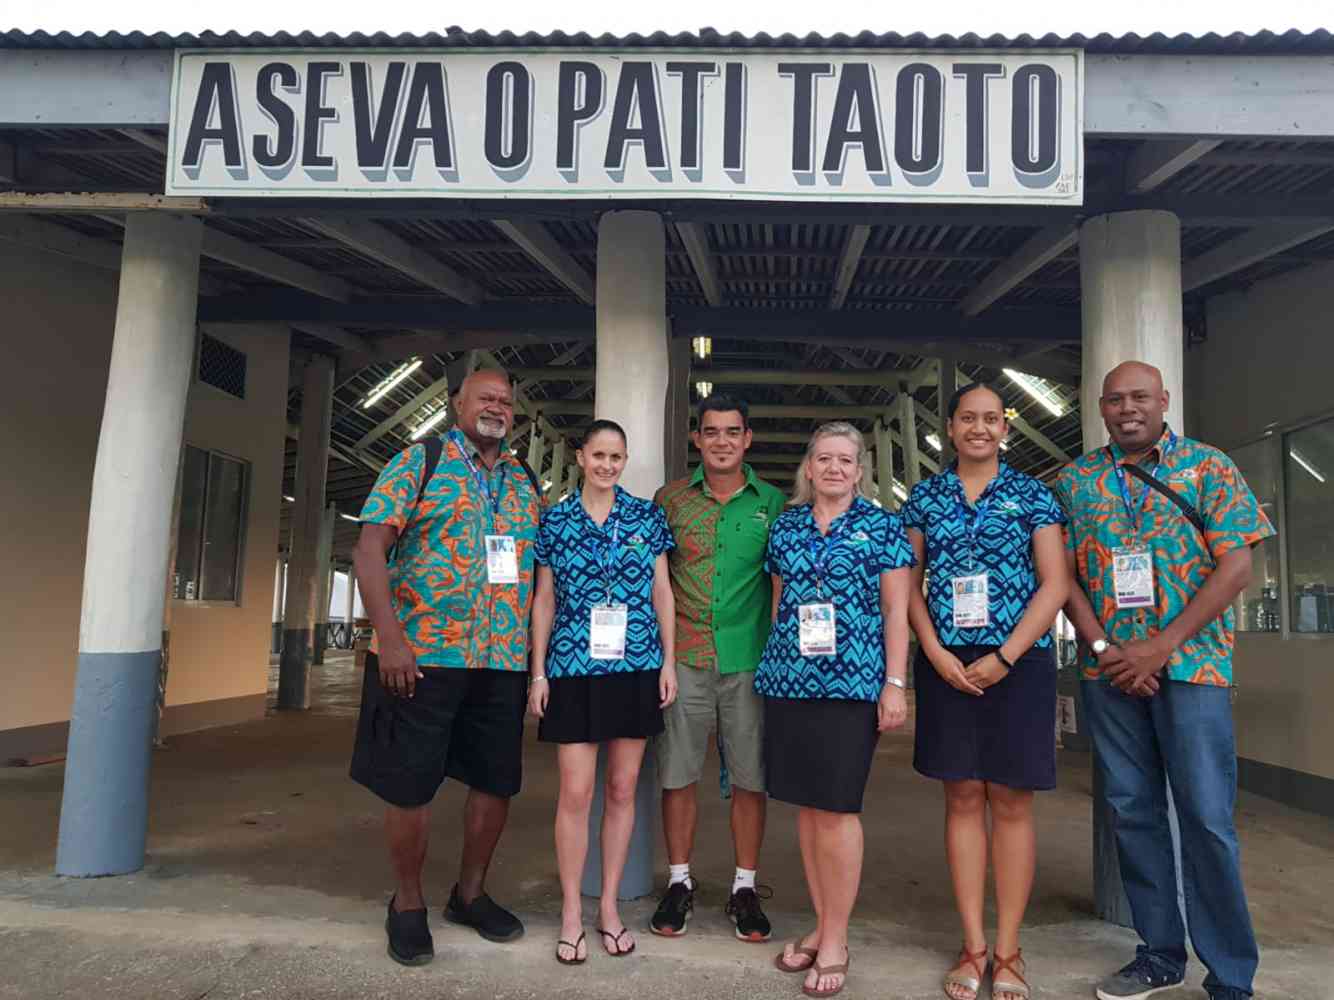 Pacific Games, Samoa 2019 - With my research team, waiting for the Chef de Mission briefing